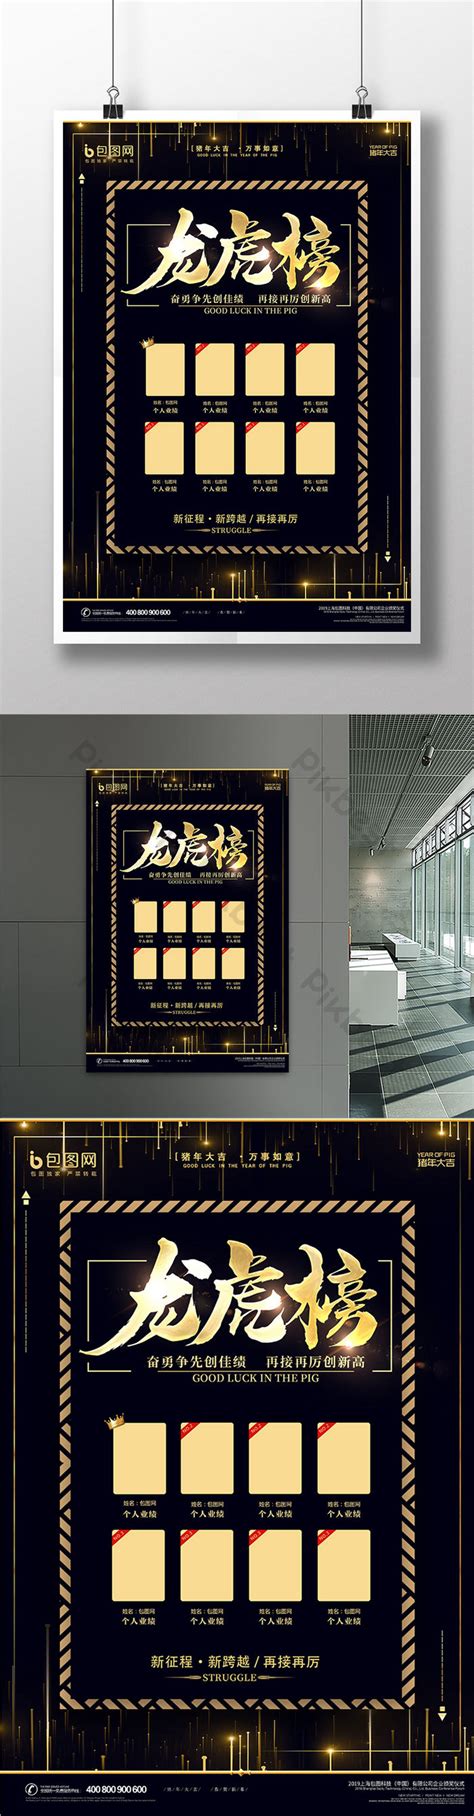 Black Gold Performance Hall Of Fame Poster Psd Free Download Pikbest